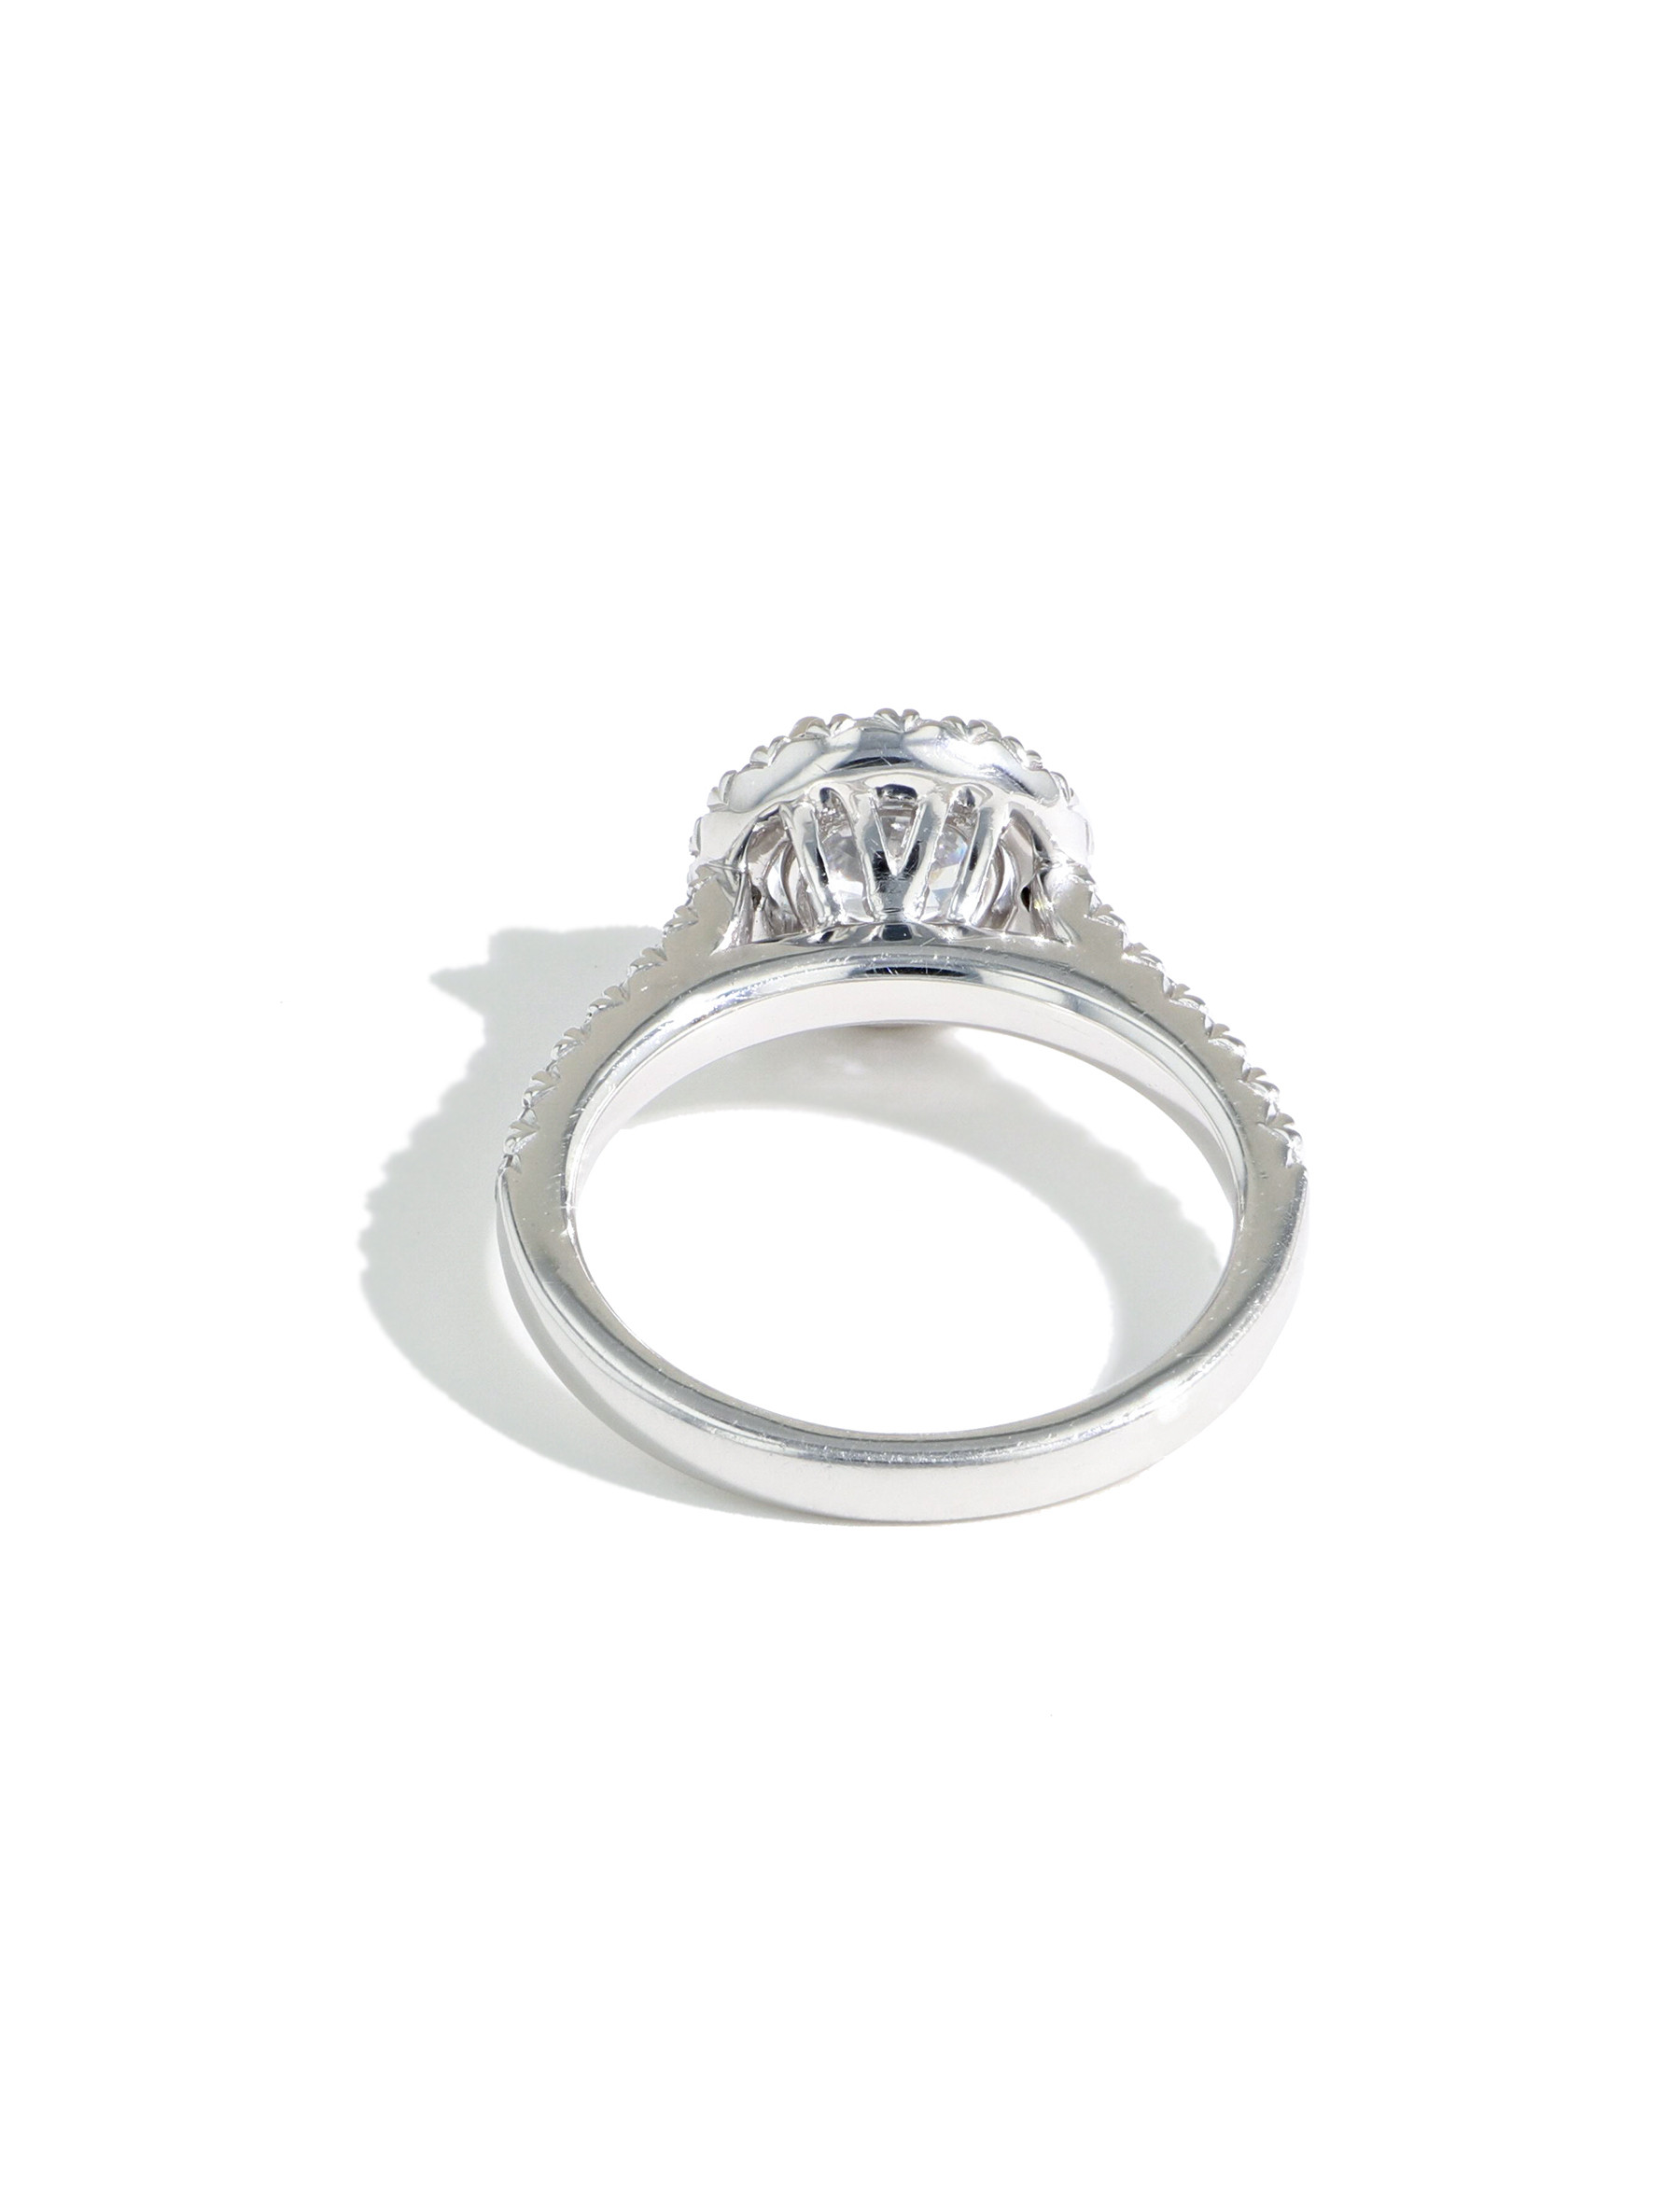 The Round Halo Pave Diamond Engagement Ring Setting back view